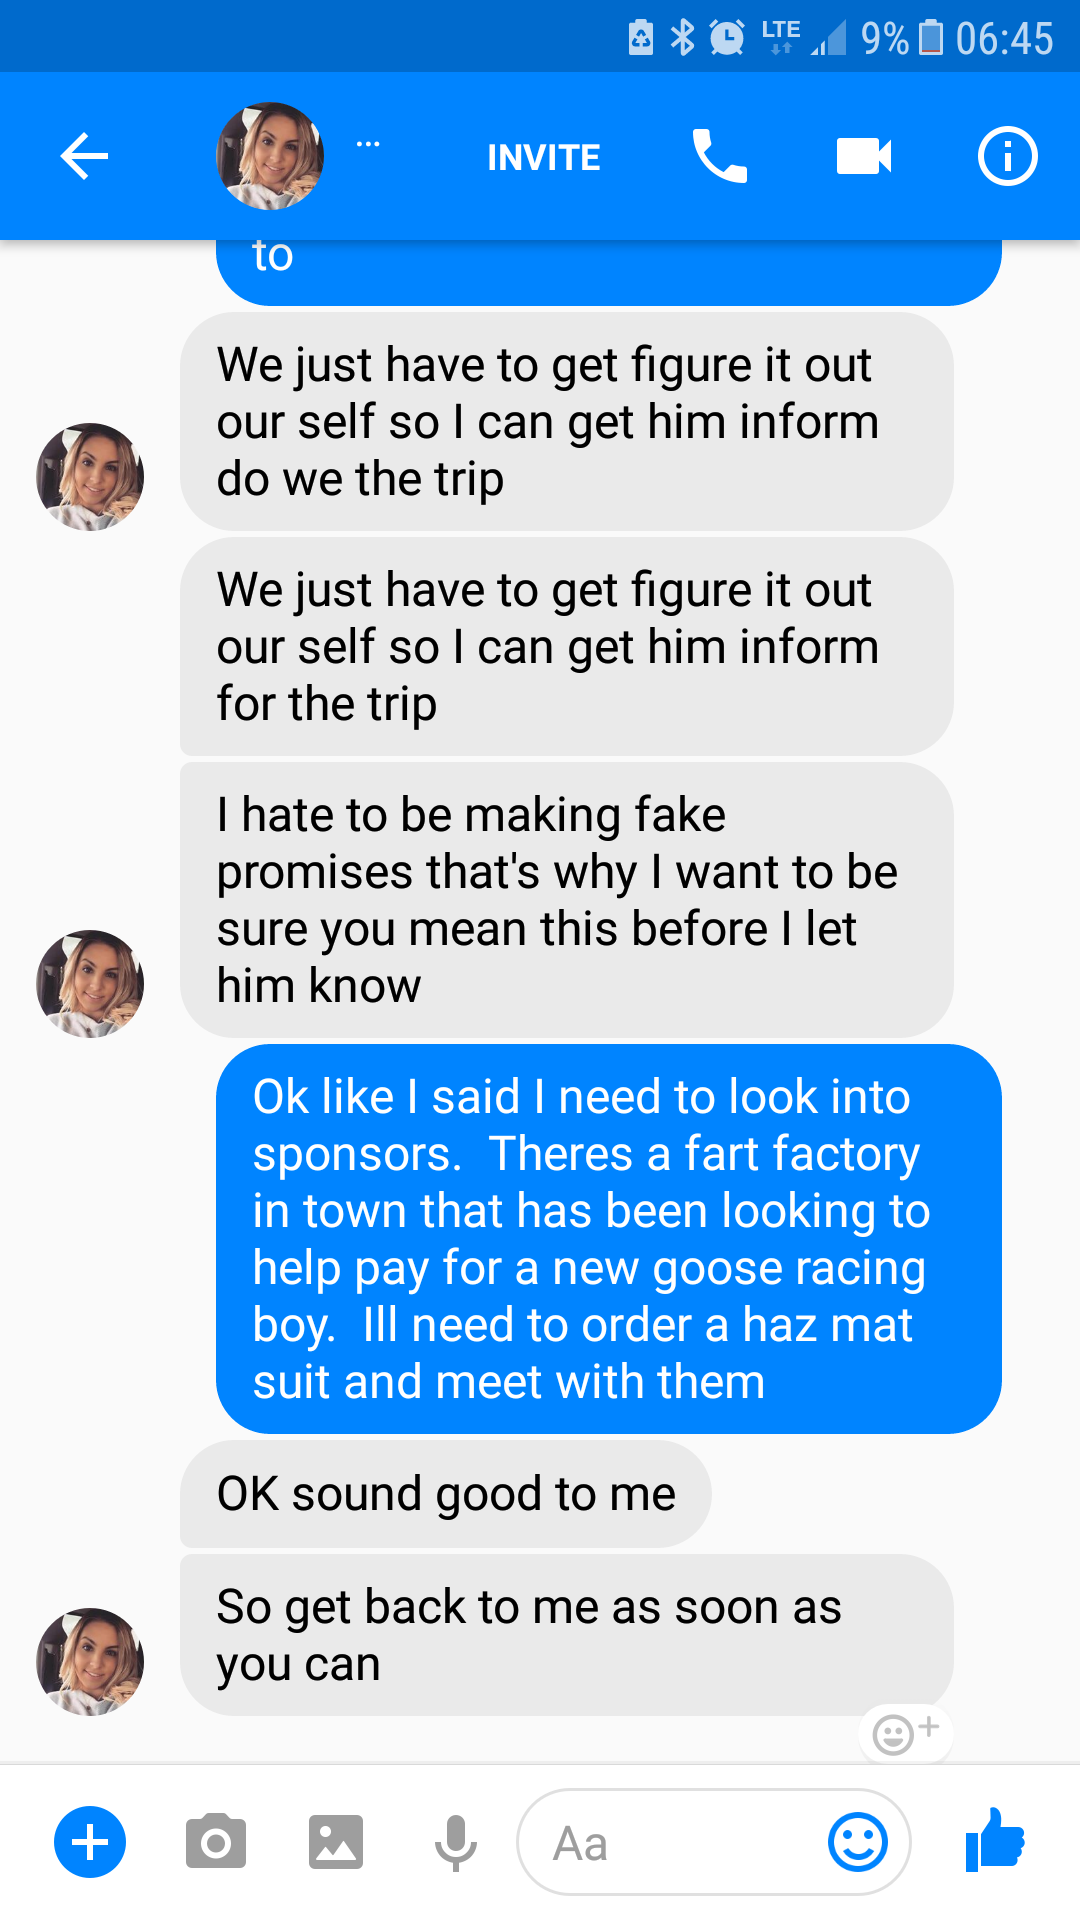 middle school cringe - A D Lte 9% Invite Invite K O to We just have to get figure it out our self so I can get him inform do we the trip We just have to get figure it out our self so I can get him inform for the trip I hate to be making fake promises that